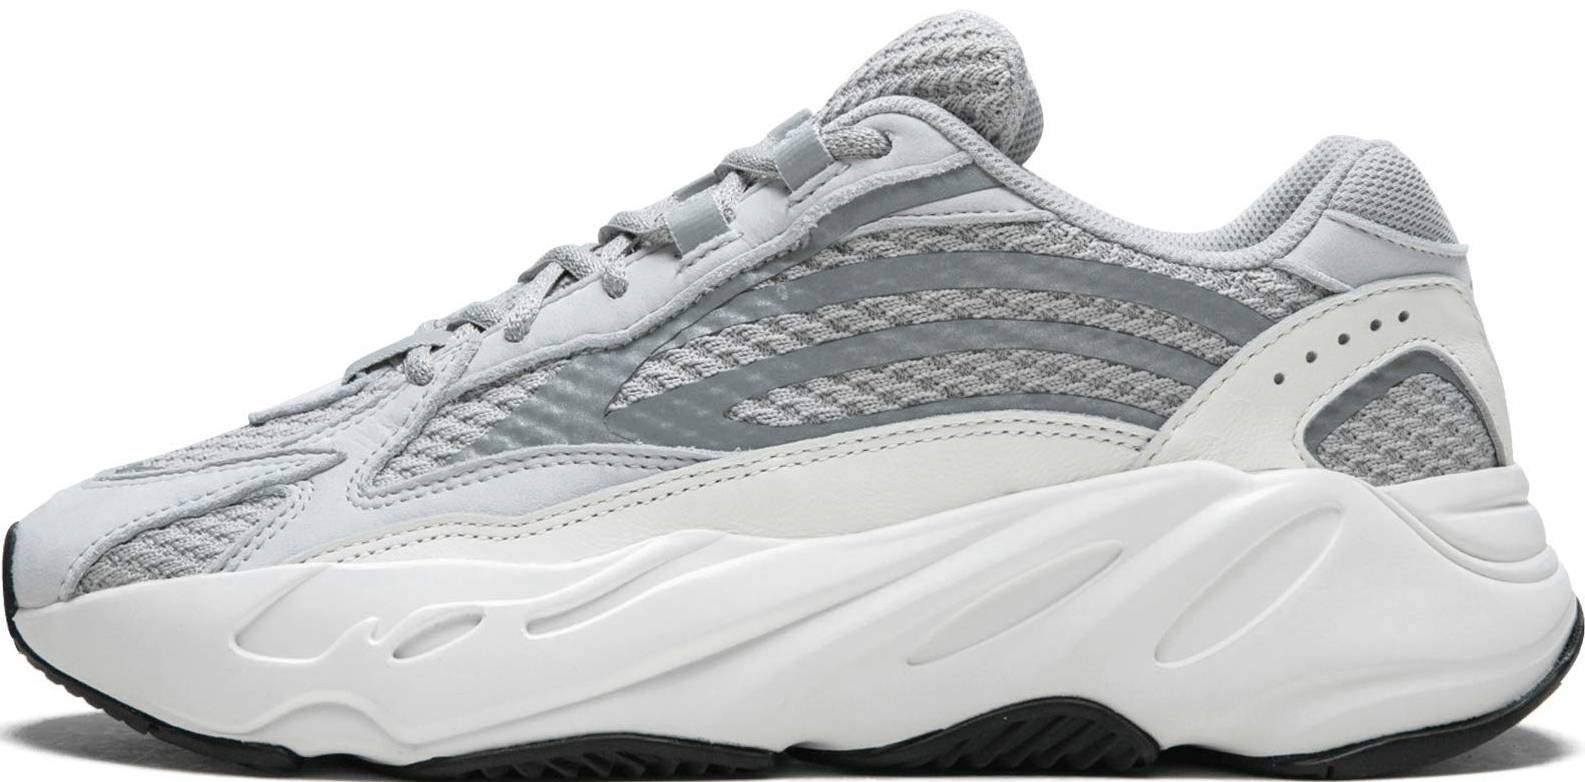 Adidas Yeezy Boost 700 v2 sneakers in 6 colors | RunRepeat